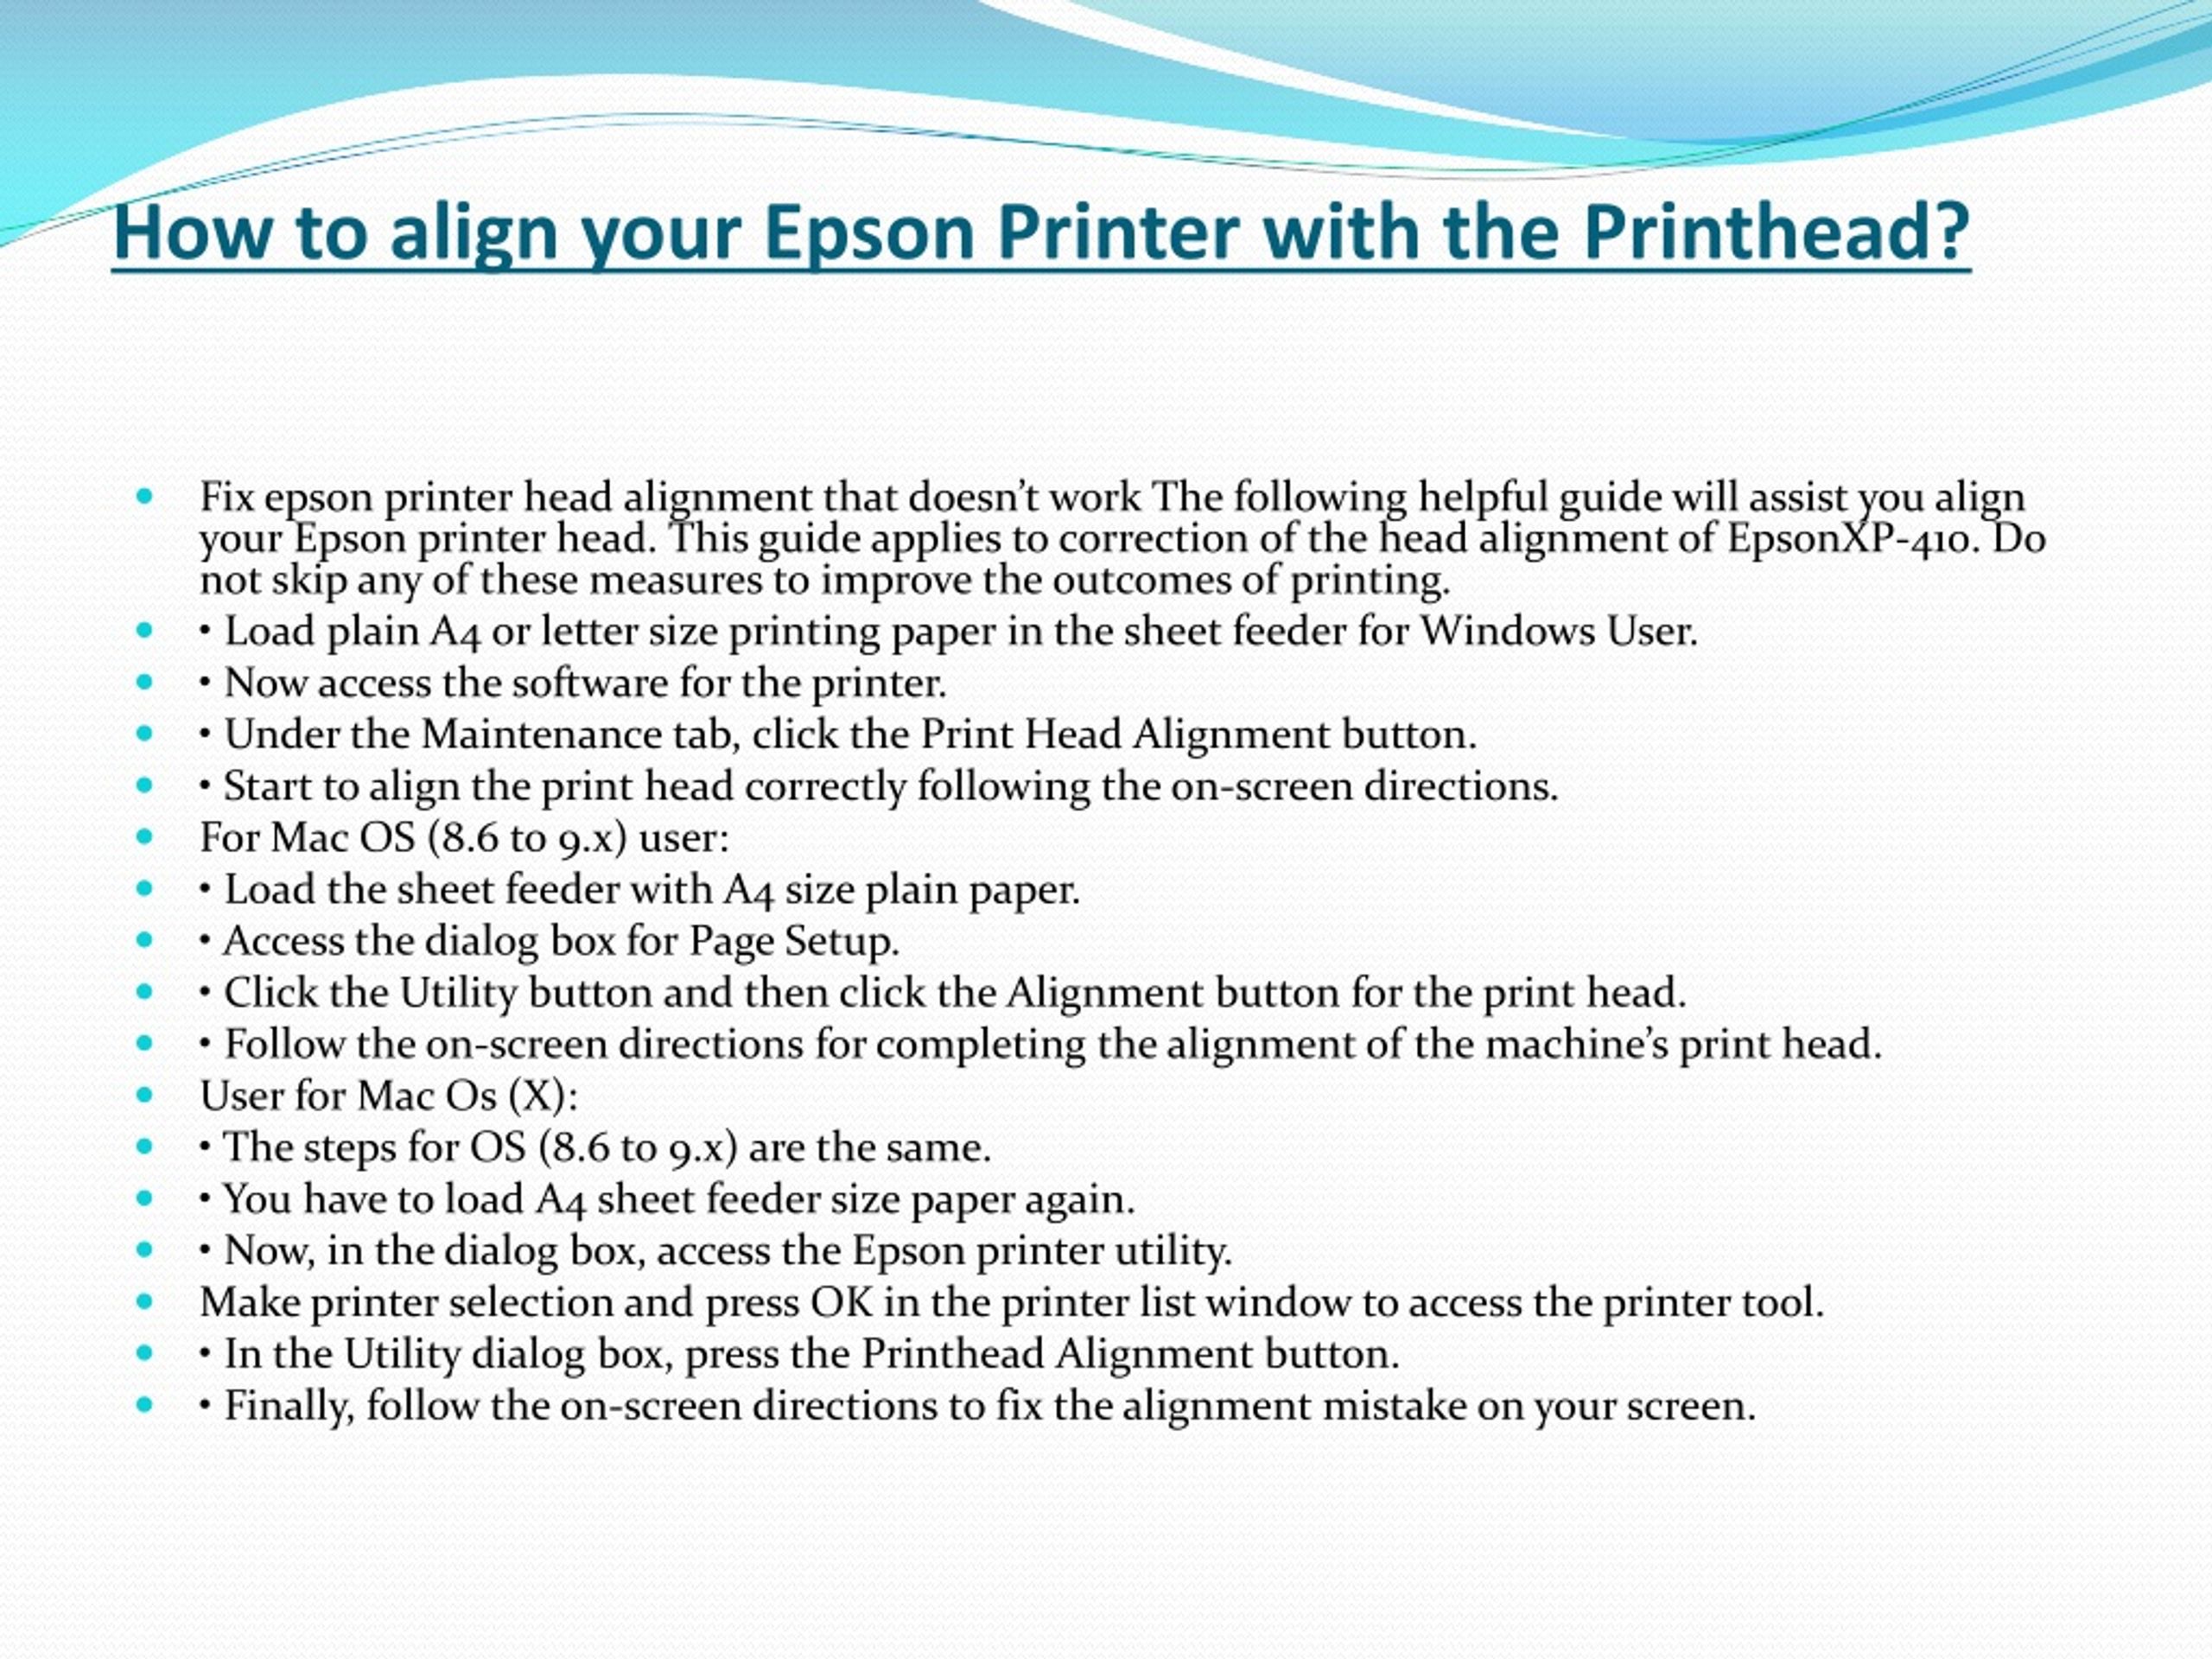 Ppt How To Fix Epson Printer Head Alignment Not Working Powerpoint Presentation Id8403203 9754